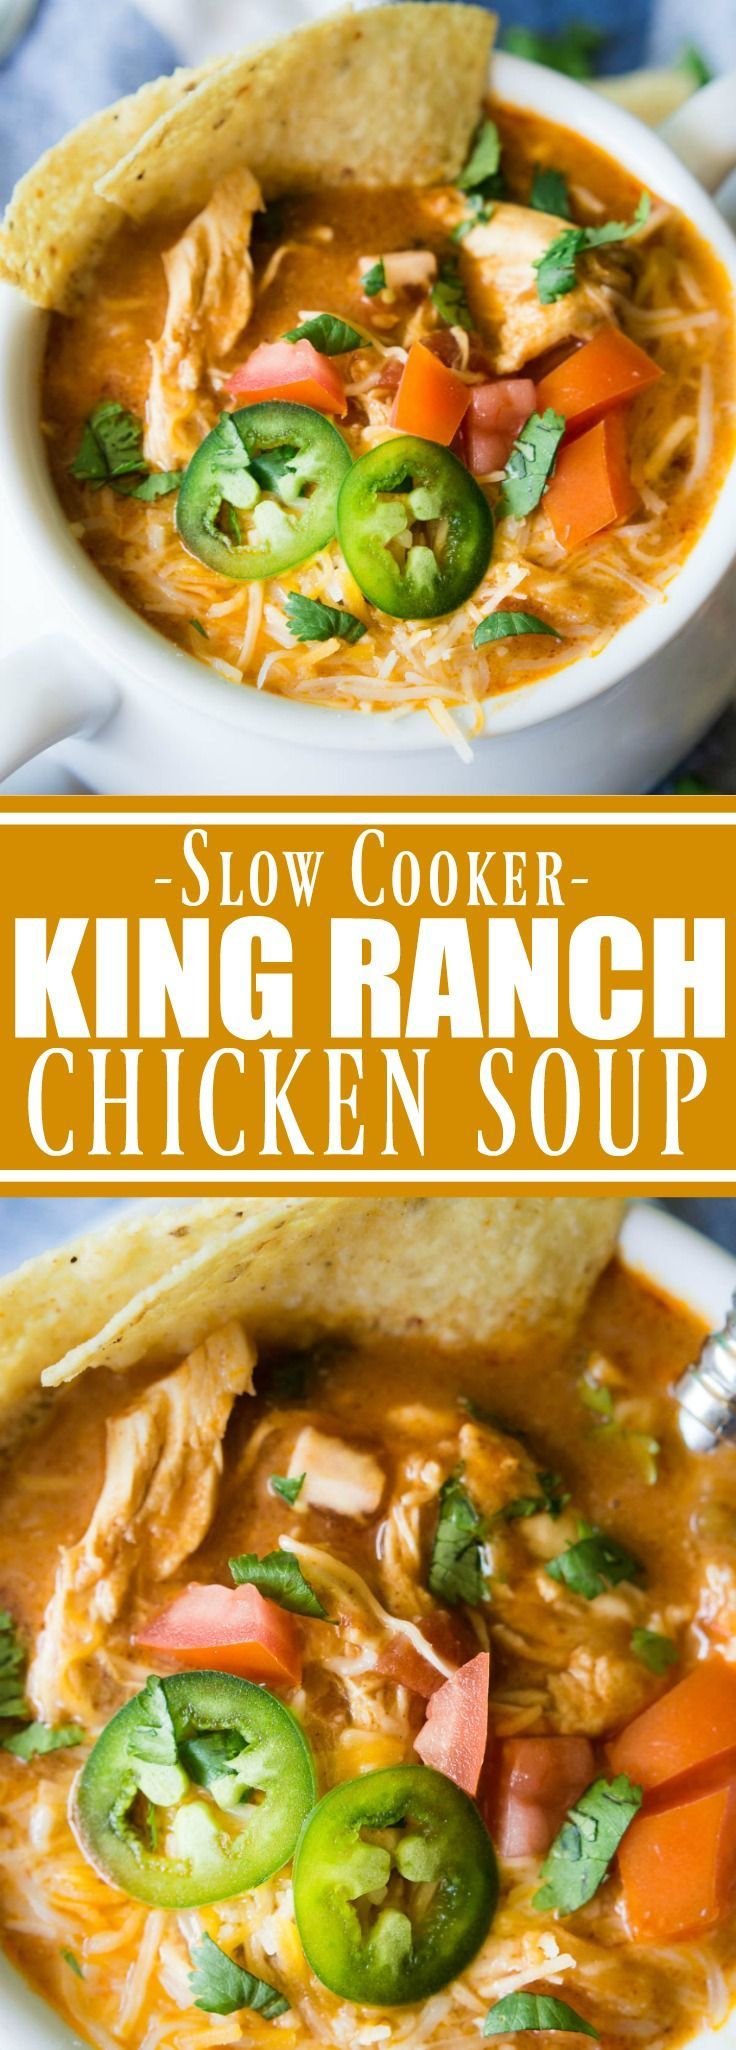 This EASY creamy soup tastes just like the beloved King Ranch Chicken Casserole. Loaded with cheese, juicy chunks of chicken, and